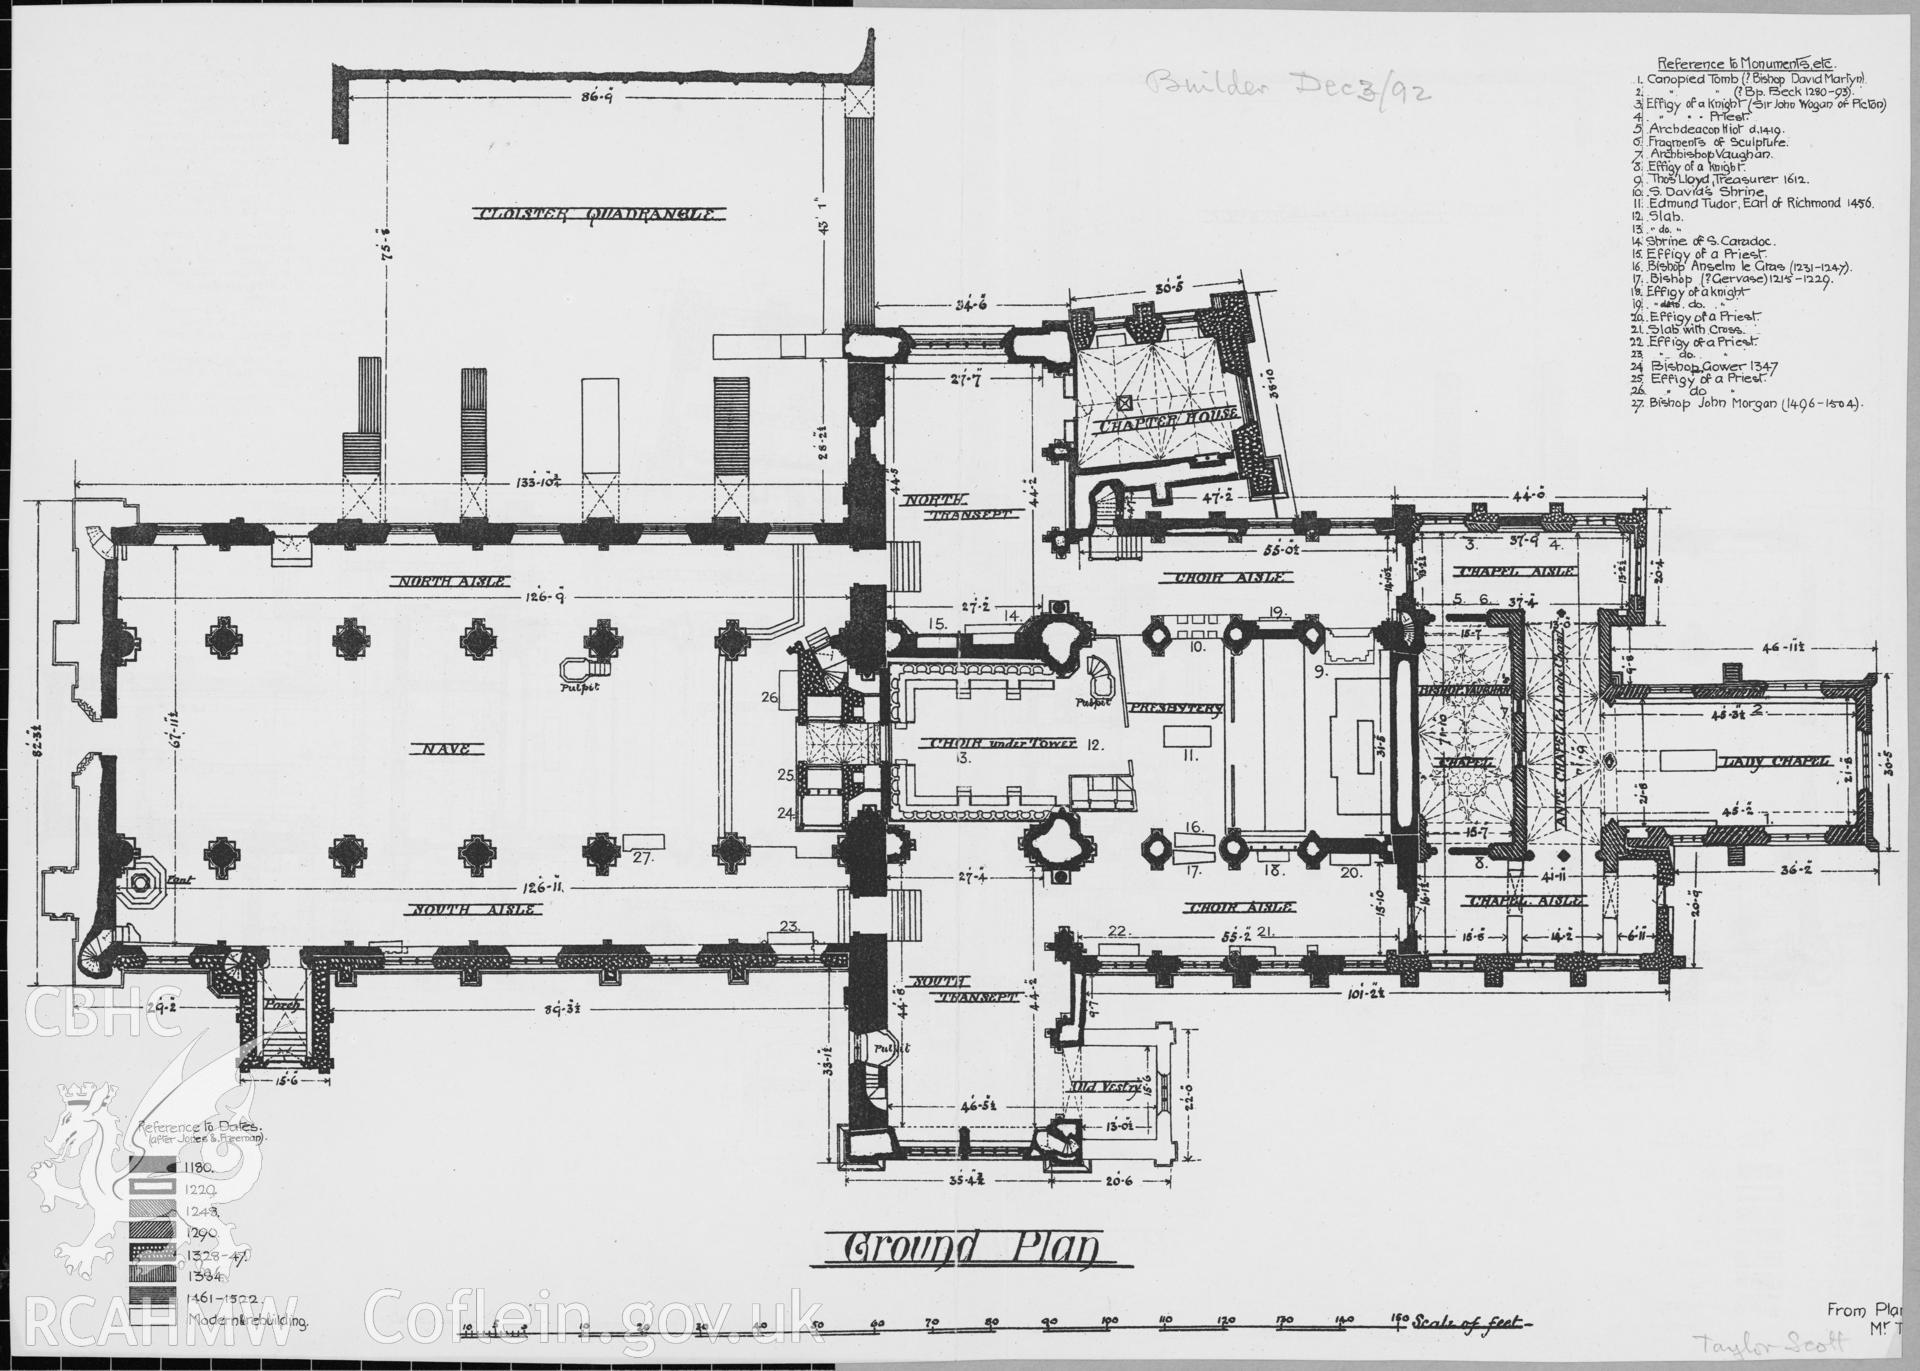 St David's Cathedral; non RCAHMW drawing showing ground plan, published in The Builder, 3rd December 1892.